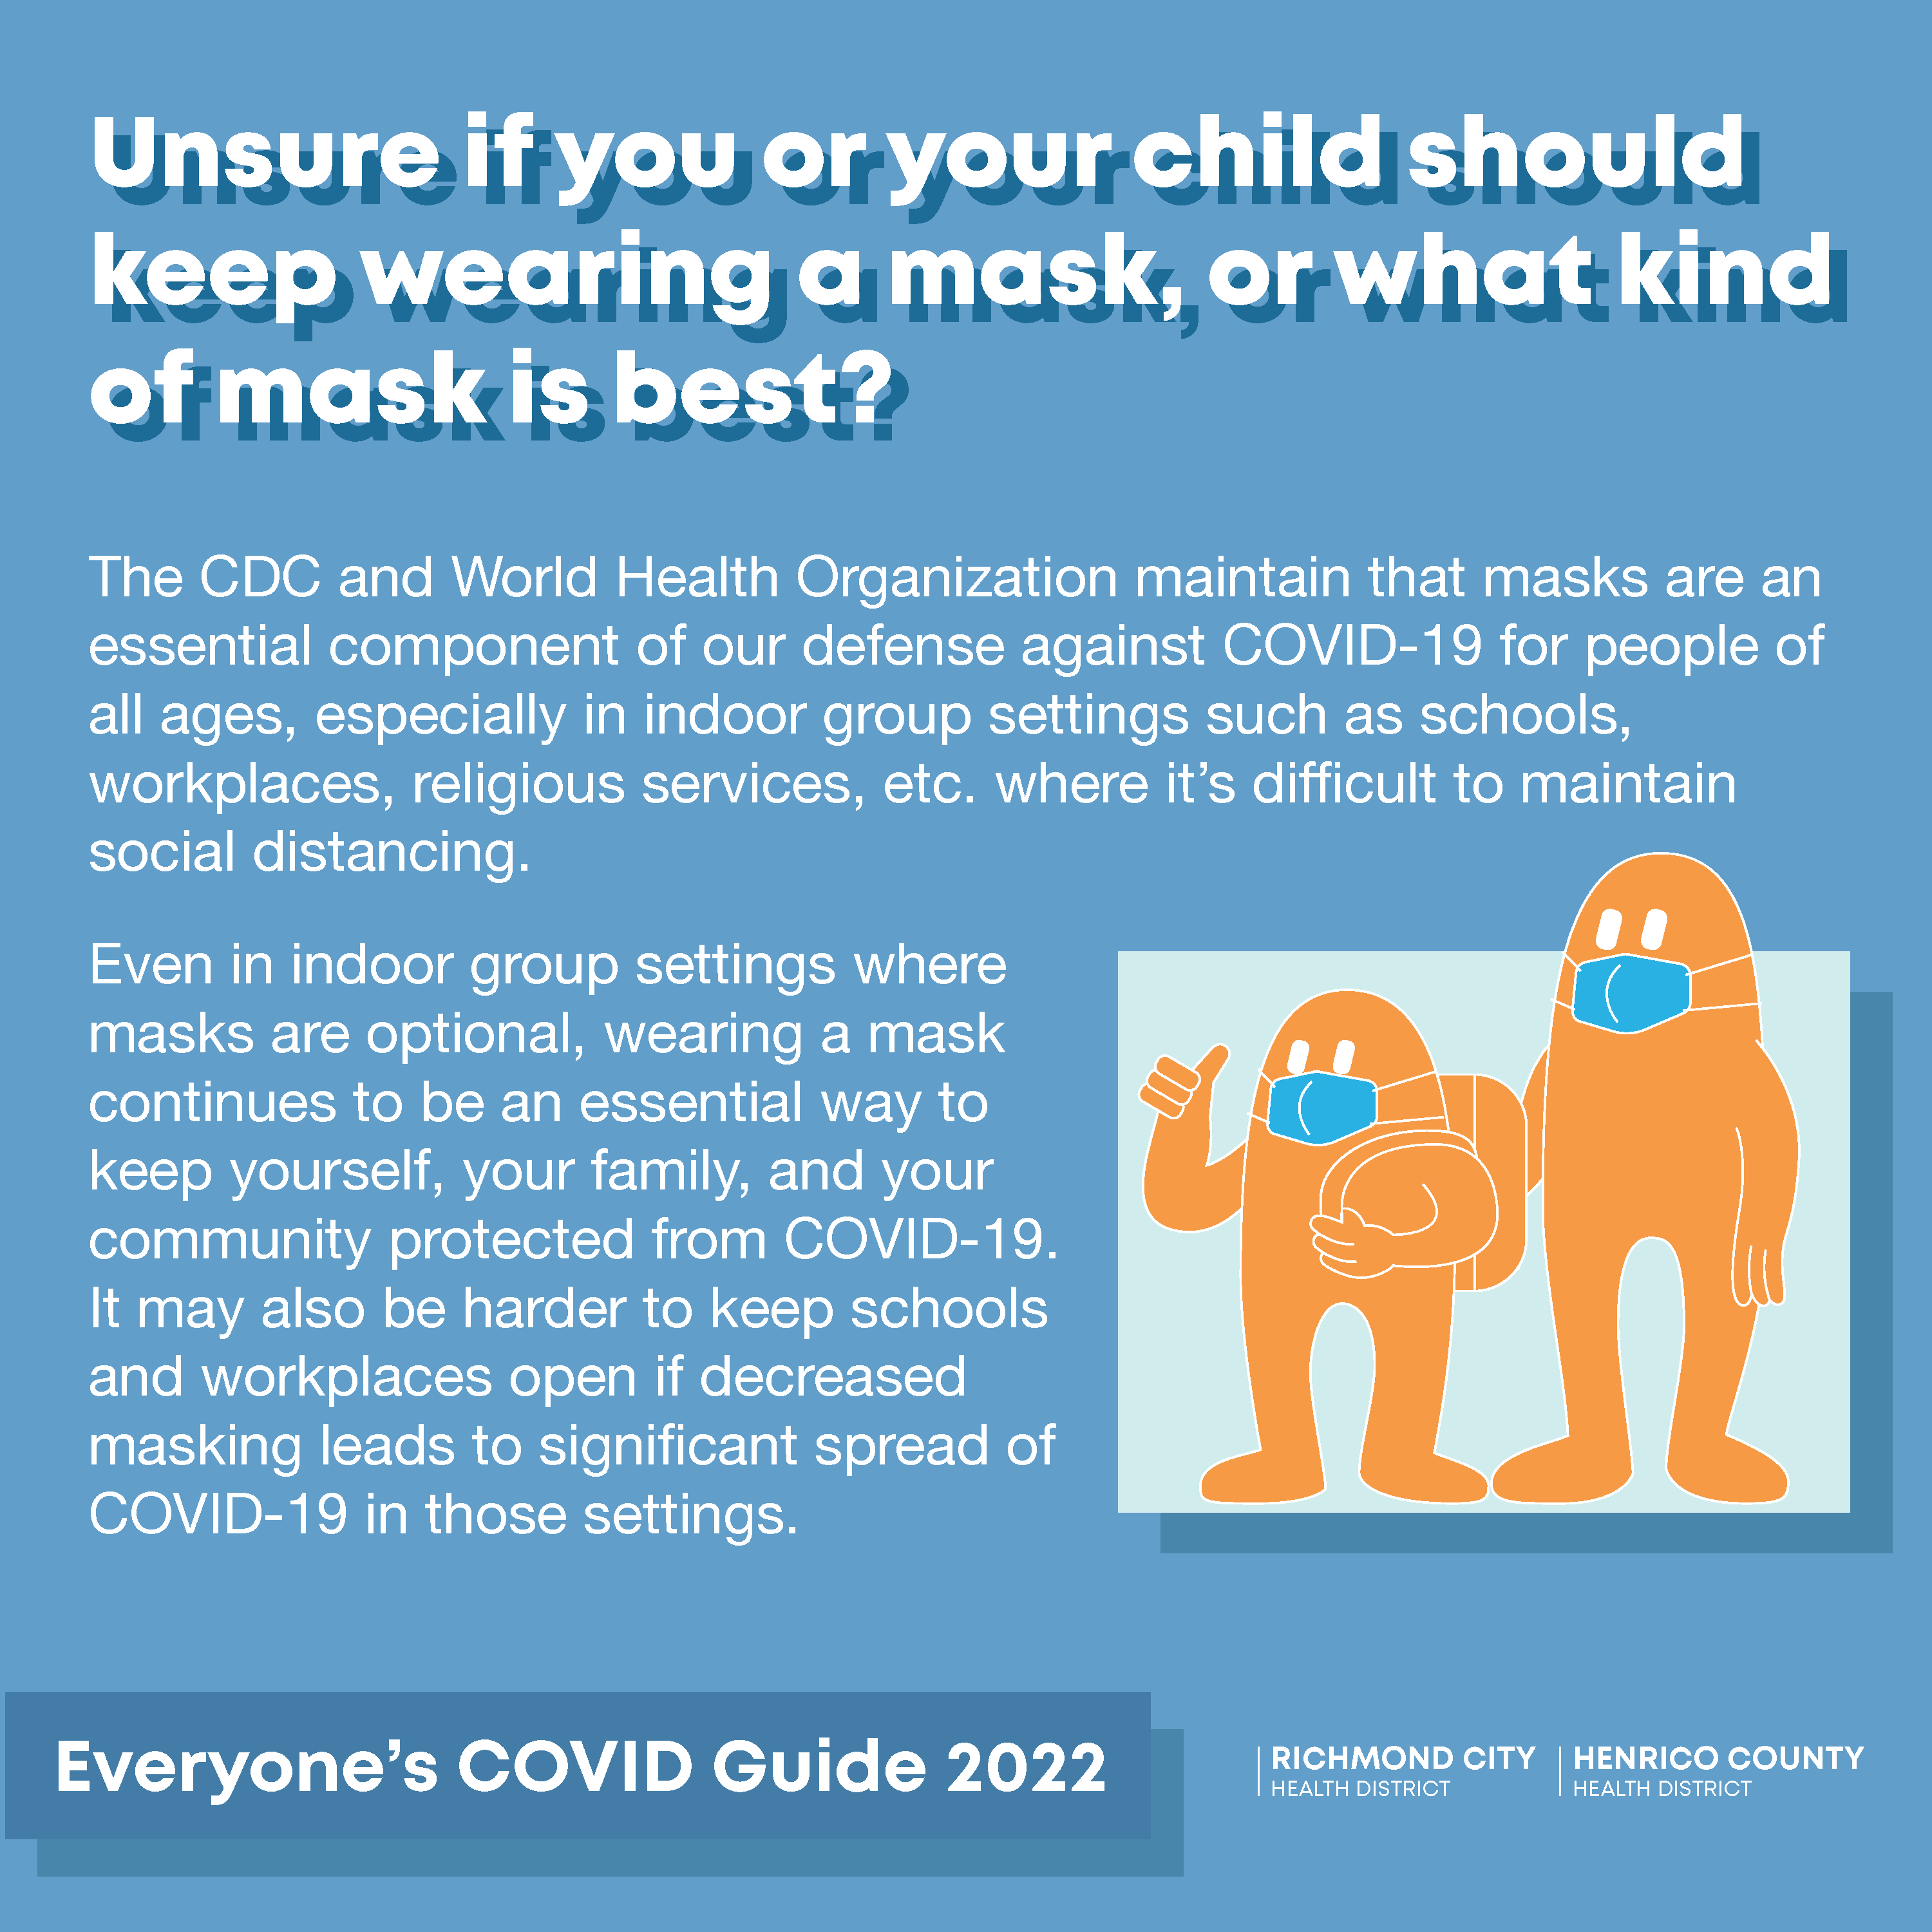 Information about mask wearing for children to prevent spread of COVID-19